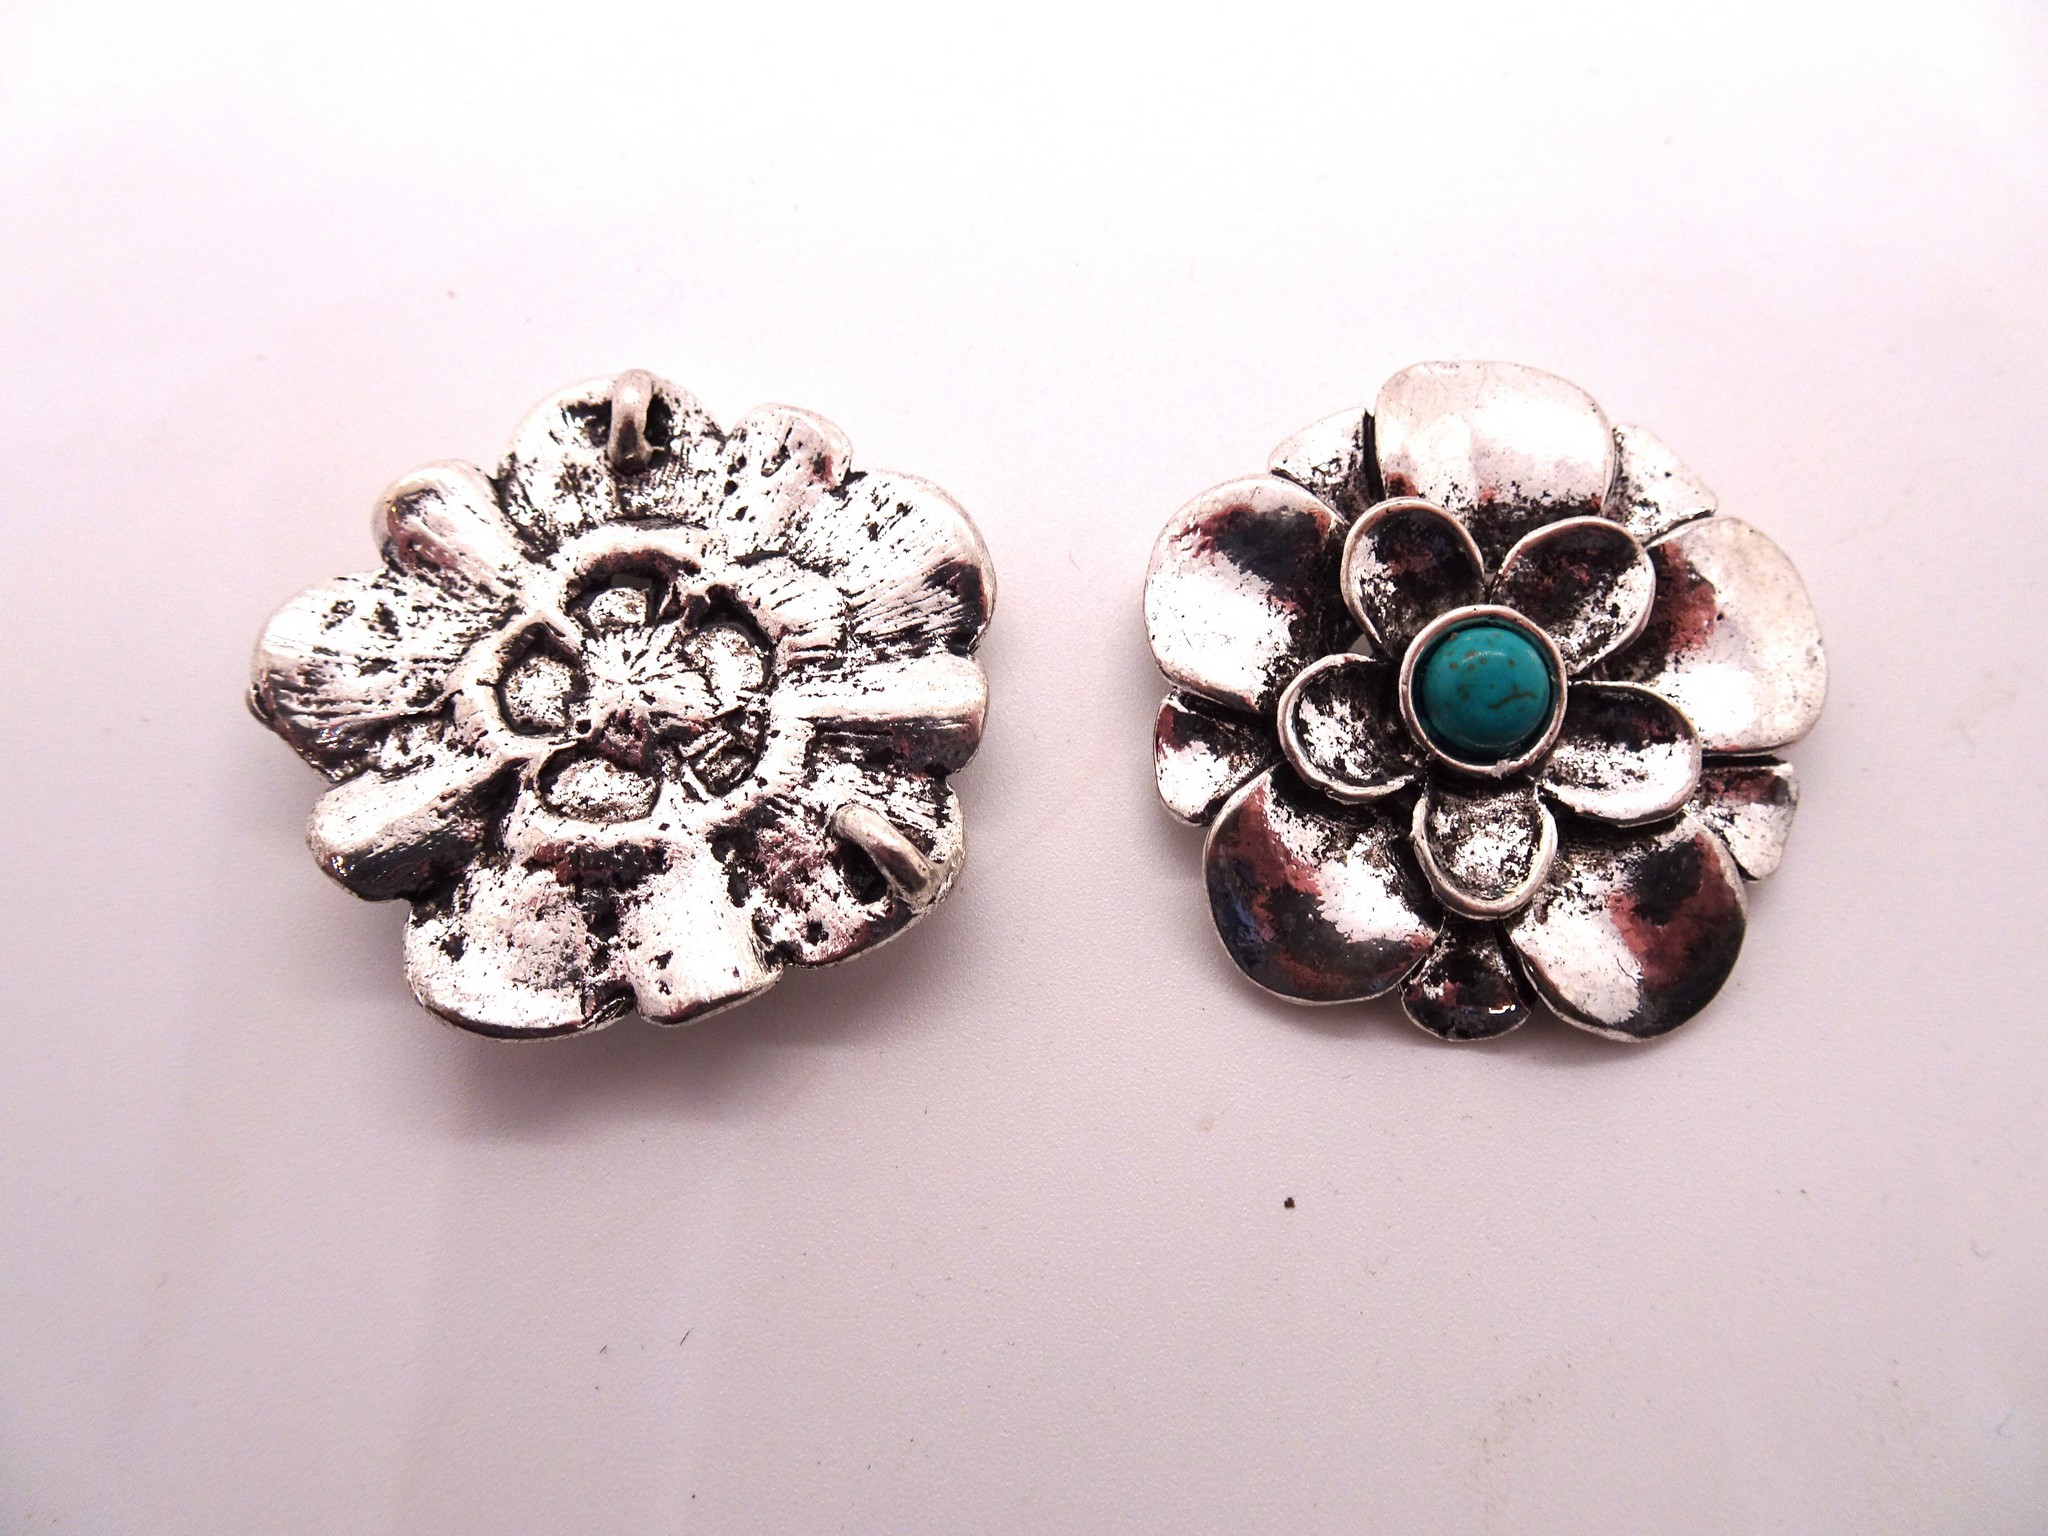 Modal Additional Images for Bronze patina flower pendant #RM-350